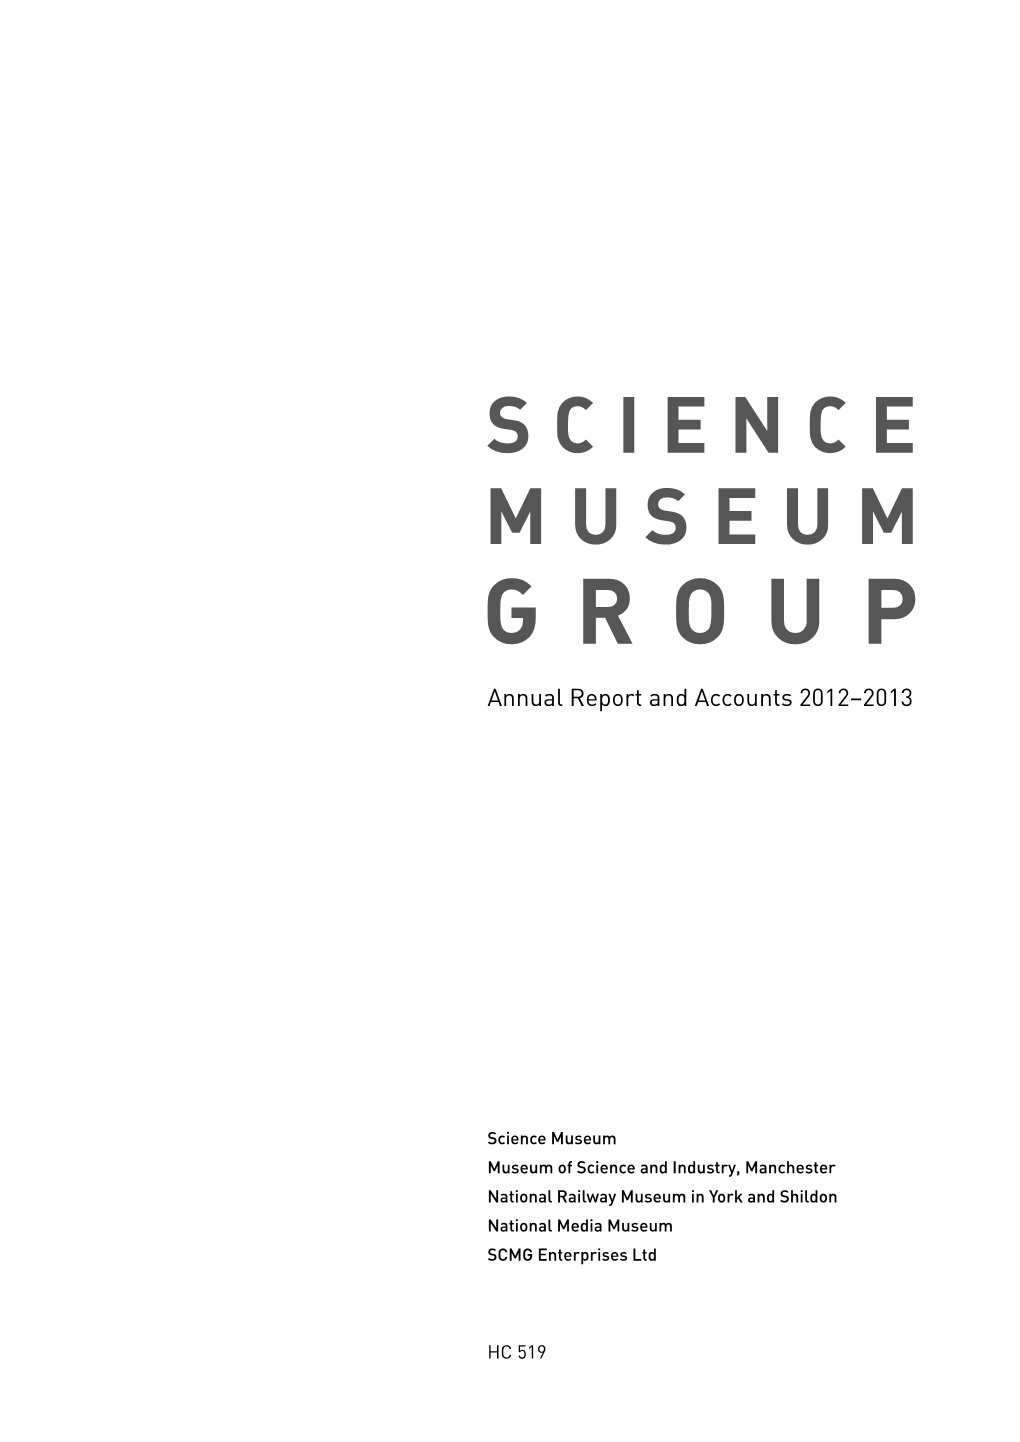 Science Museum Group Annual Report and Accounts 2012-2013